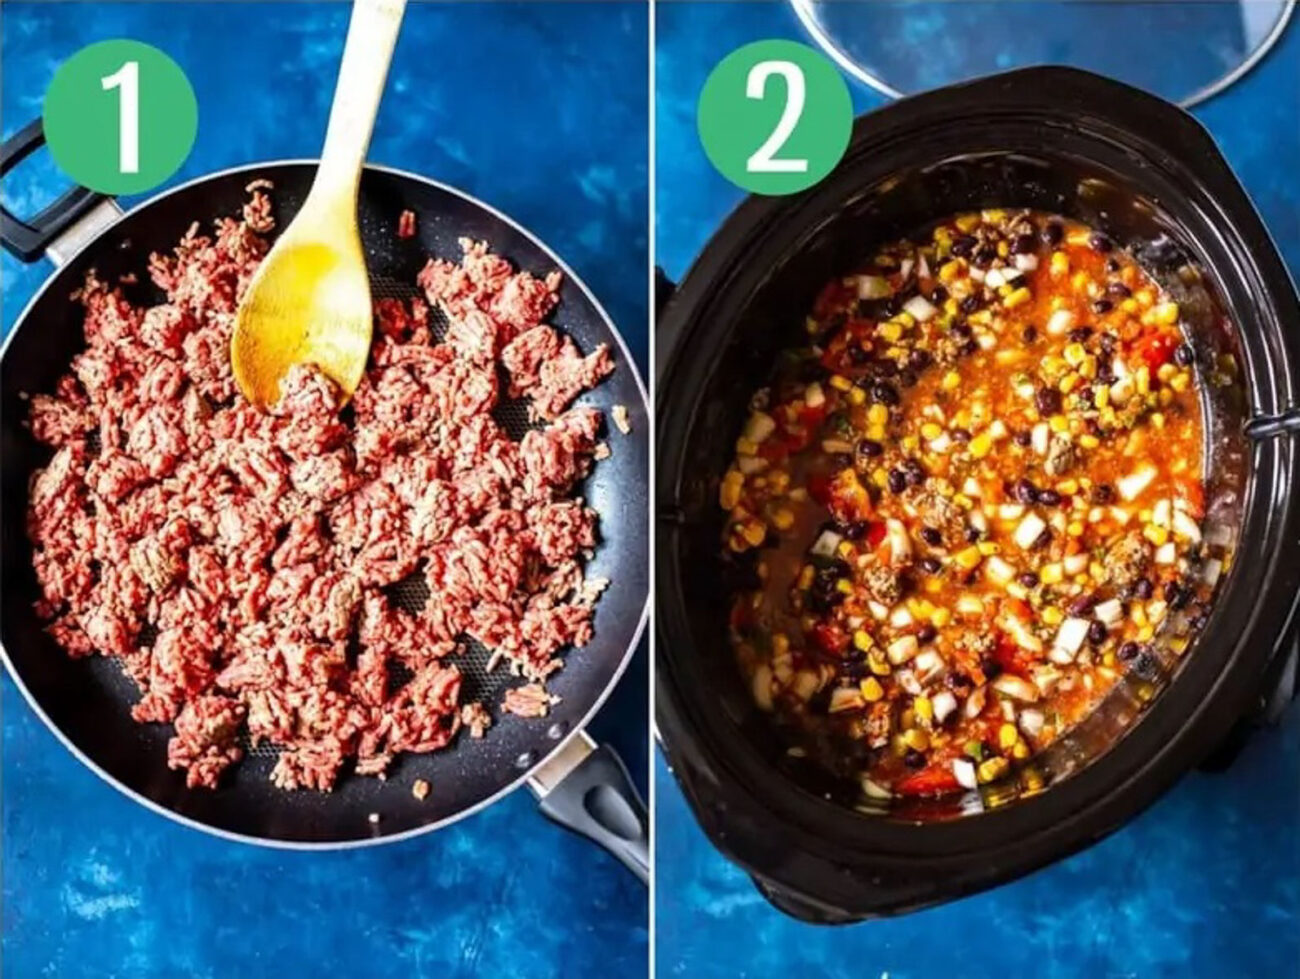 Steps 1 and 2 for making crockpot taco soup: Brown the beef then add everything to the crockpot.